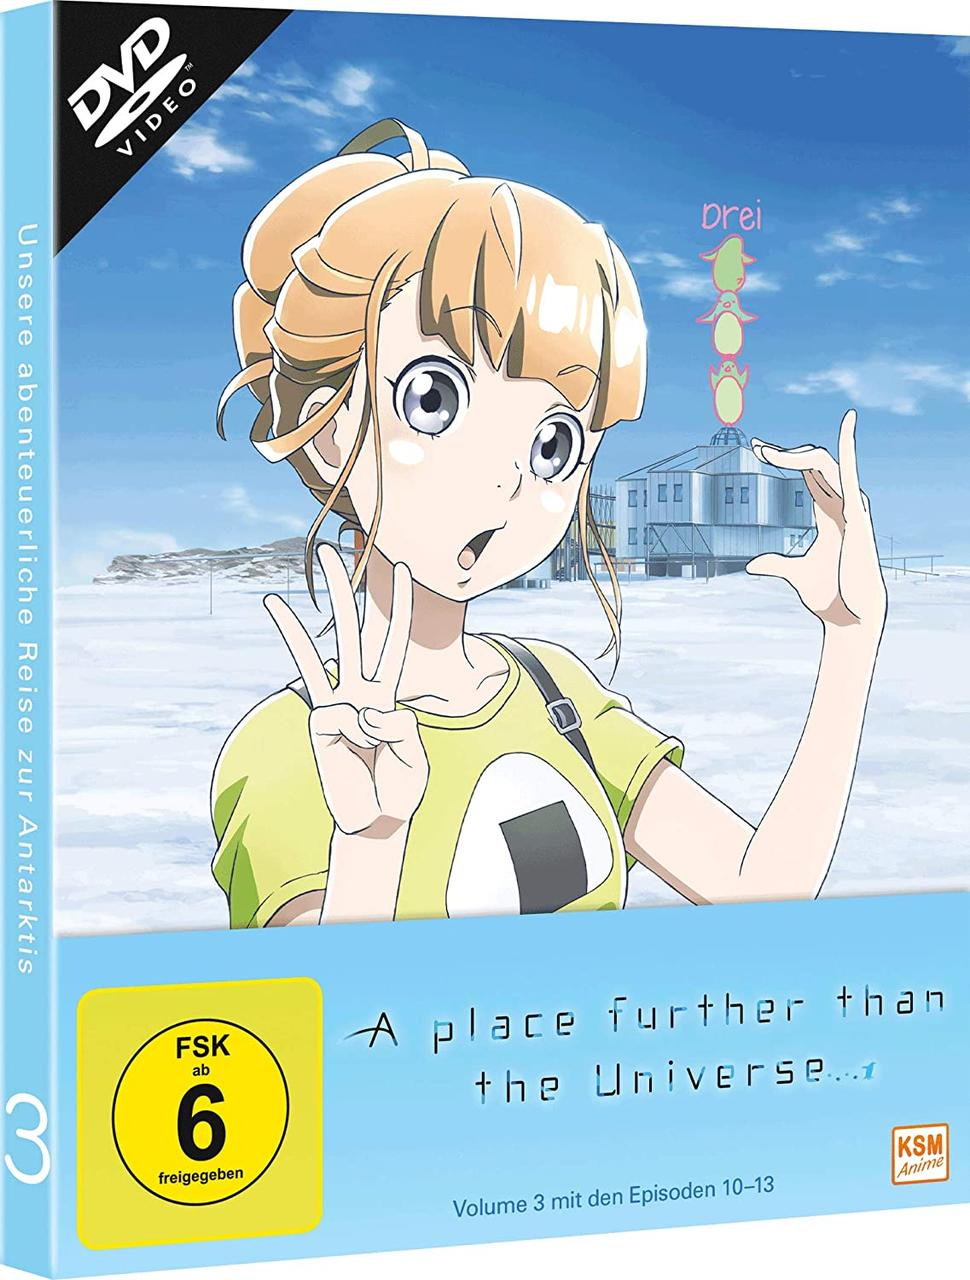 Volume DVD Universe The Further Place 3 A 10-13) Than - (Episode